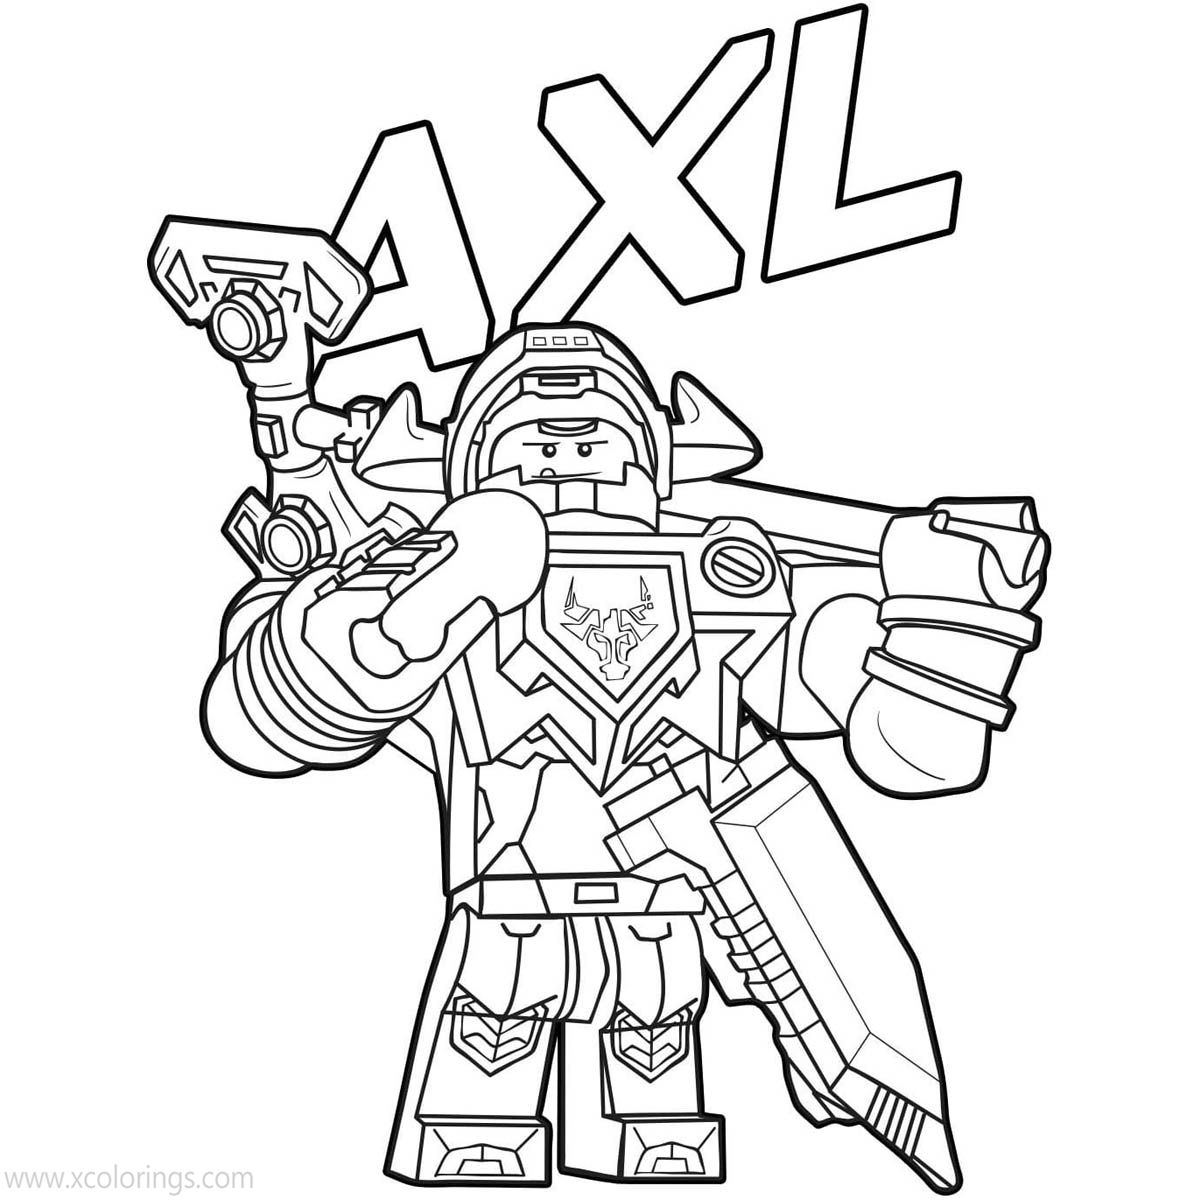 Free LEGO NEXO Knights Coloring Pages Axl printable